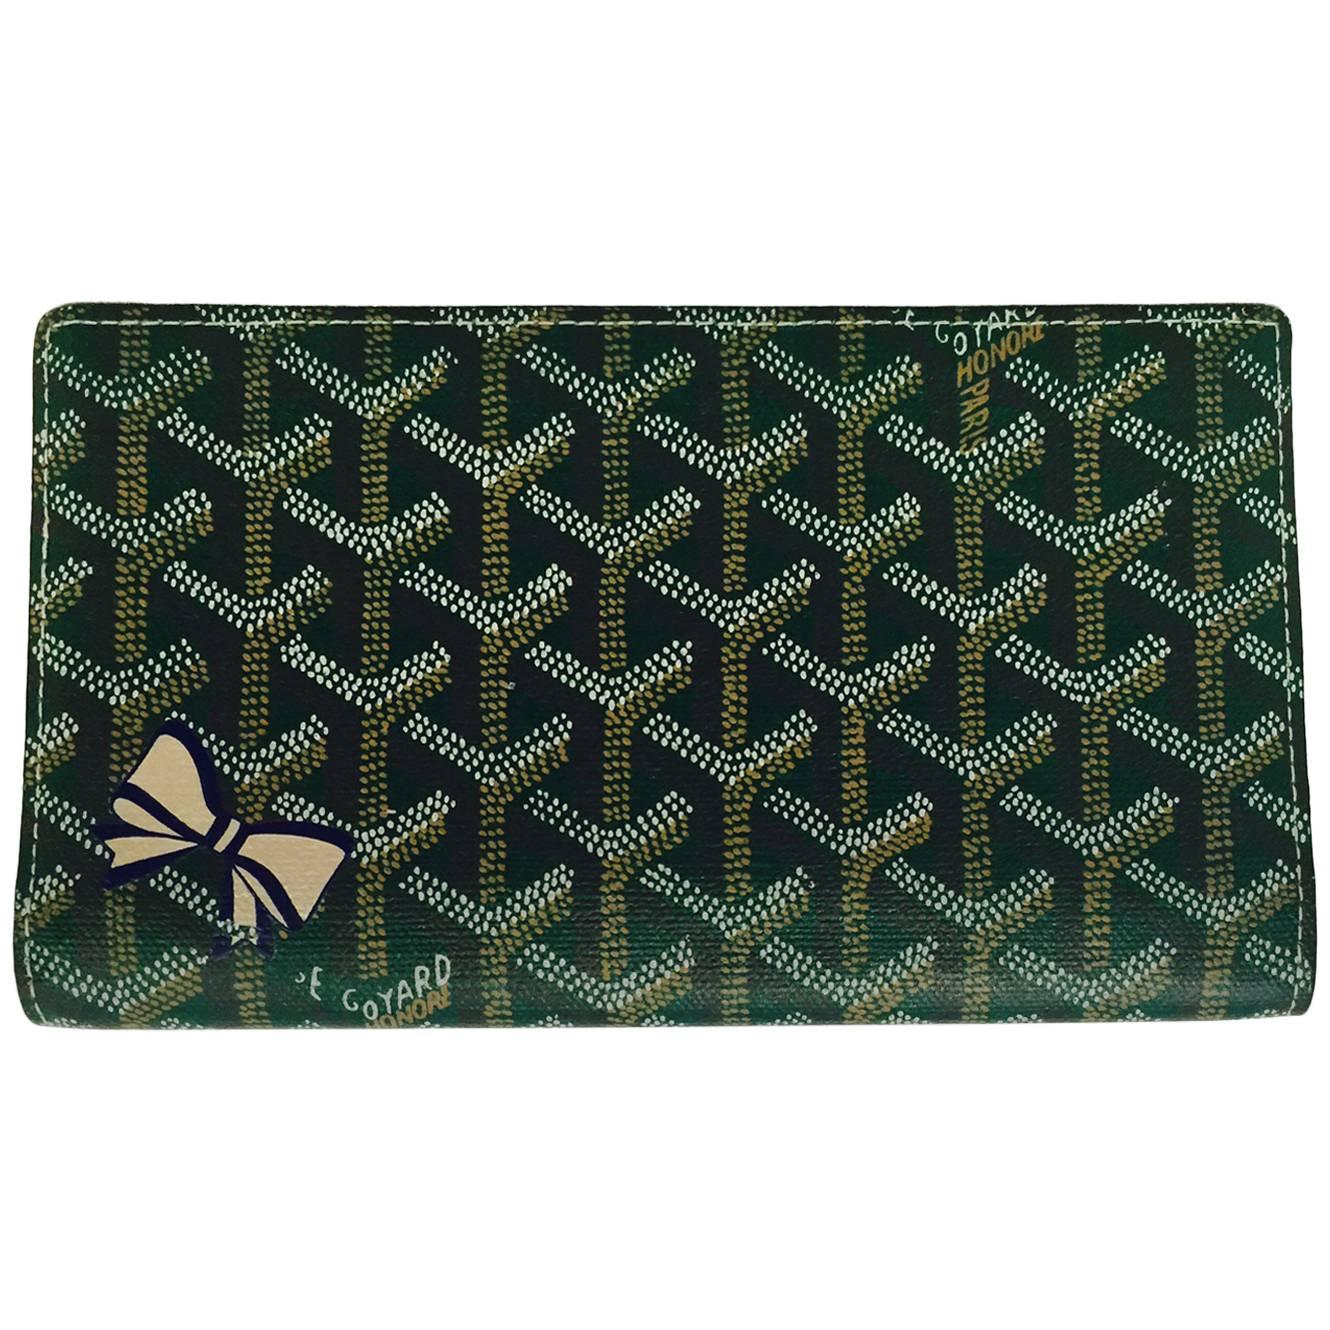 Goyard Green Goyardine Long Wallet W Blue and Gold Bow Excellent Condition  